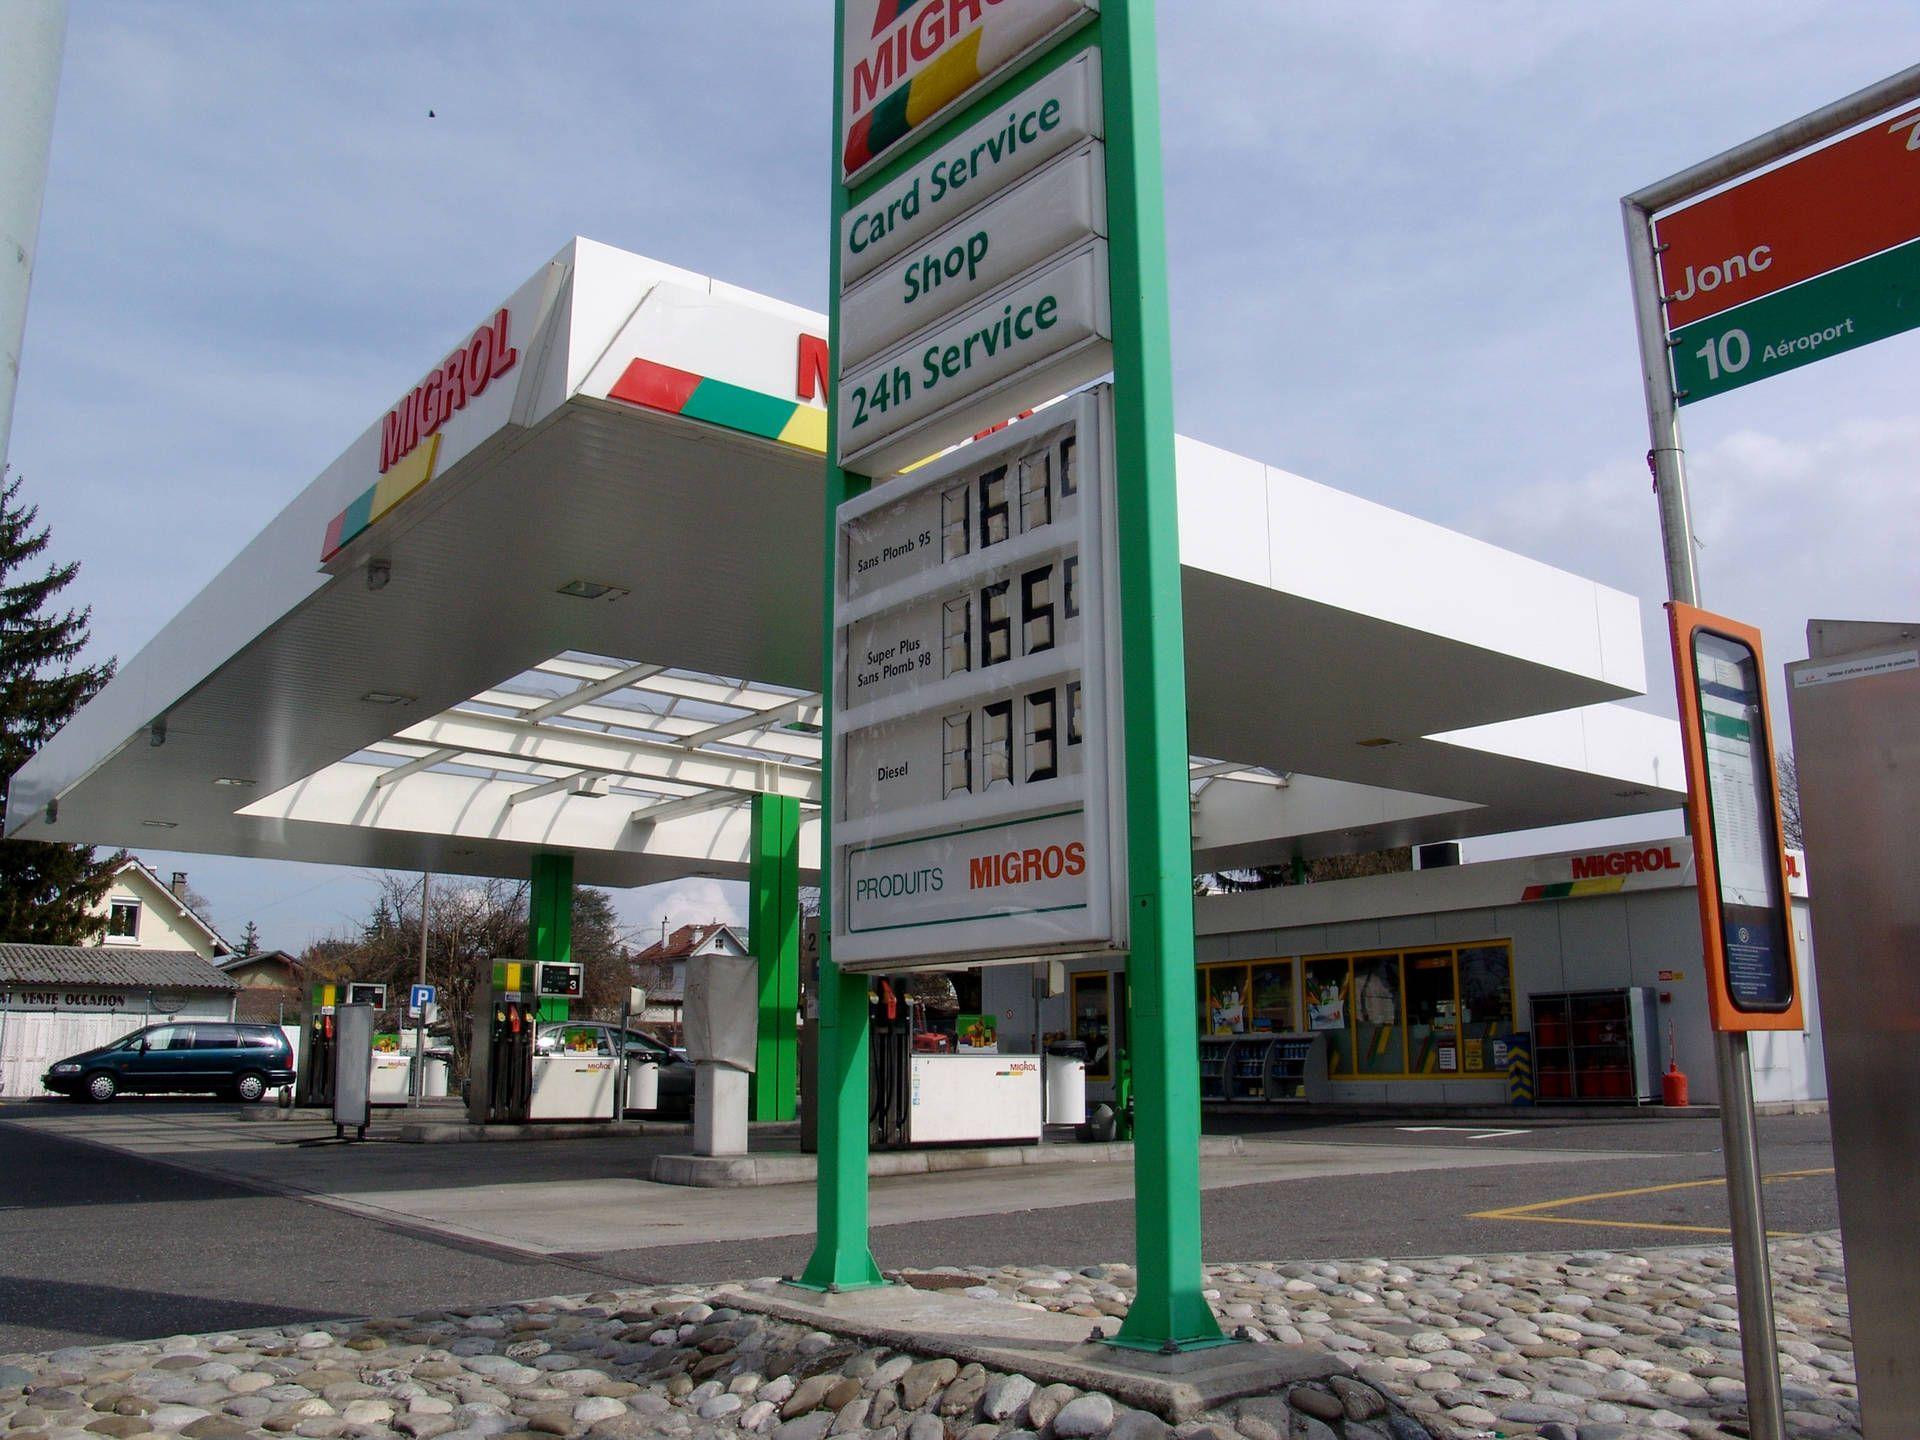 Automotive fuels petrol station in europe energy № 49935